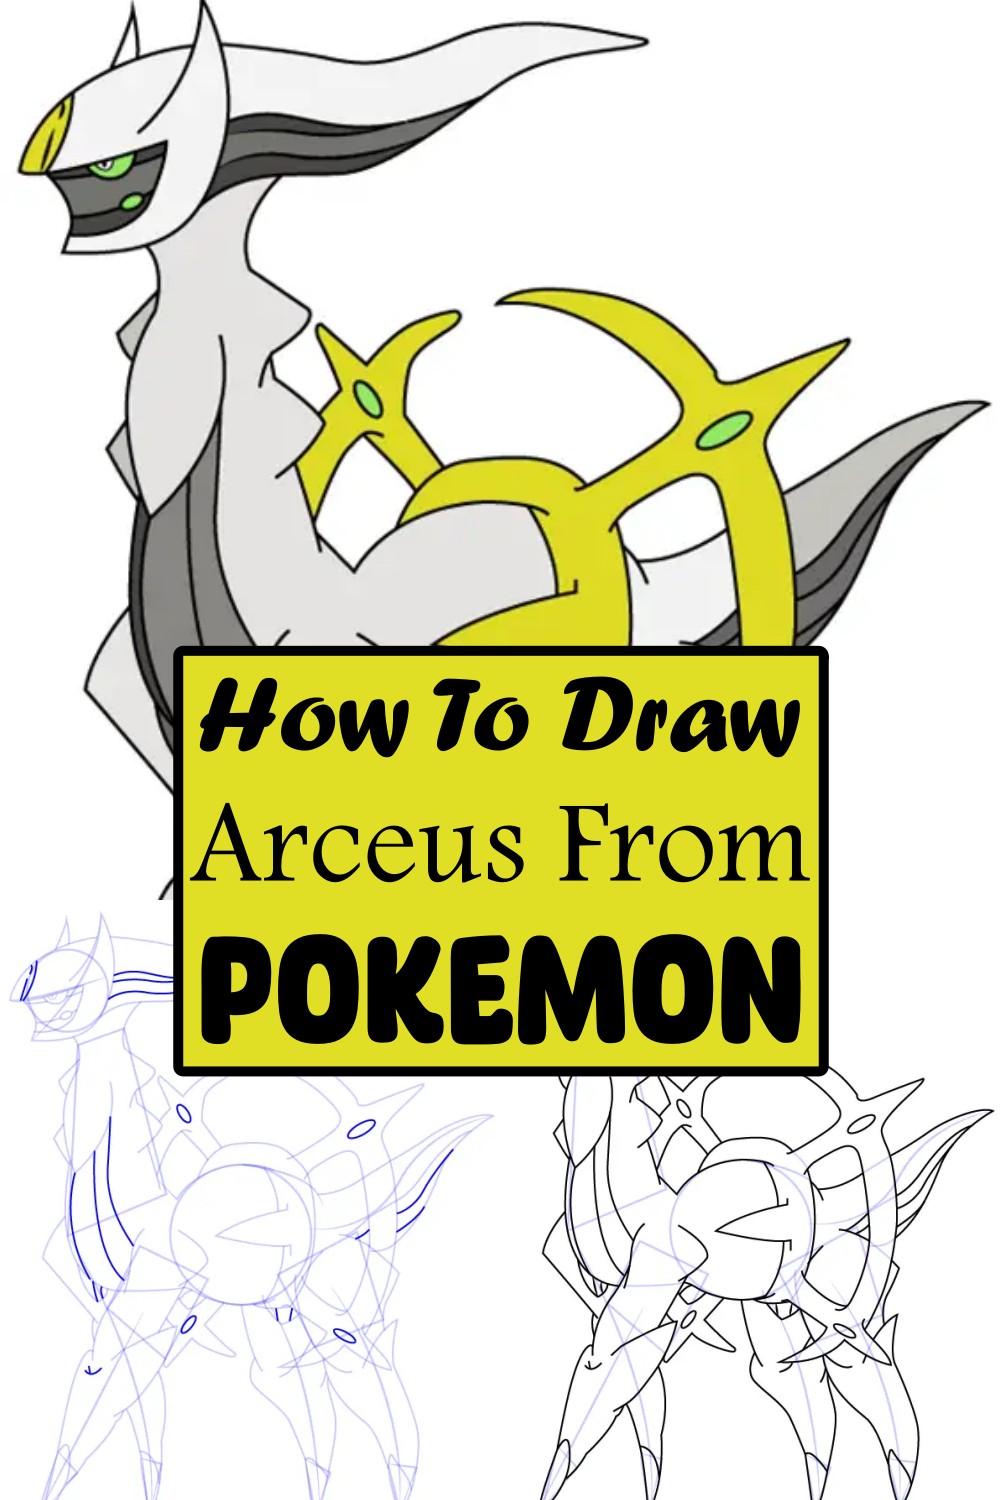 How To Draw Arceus From Pokemon